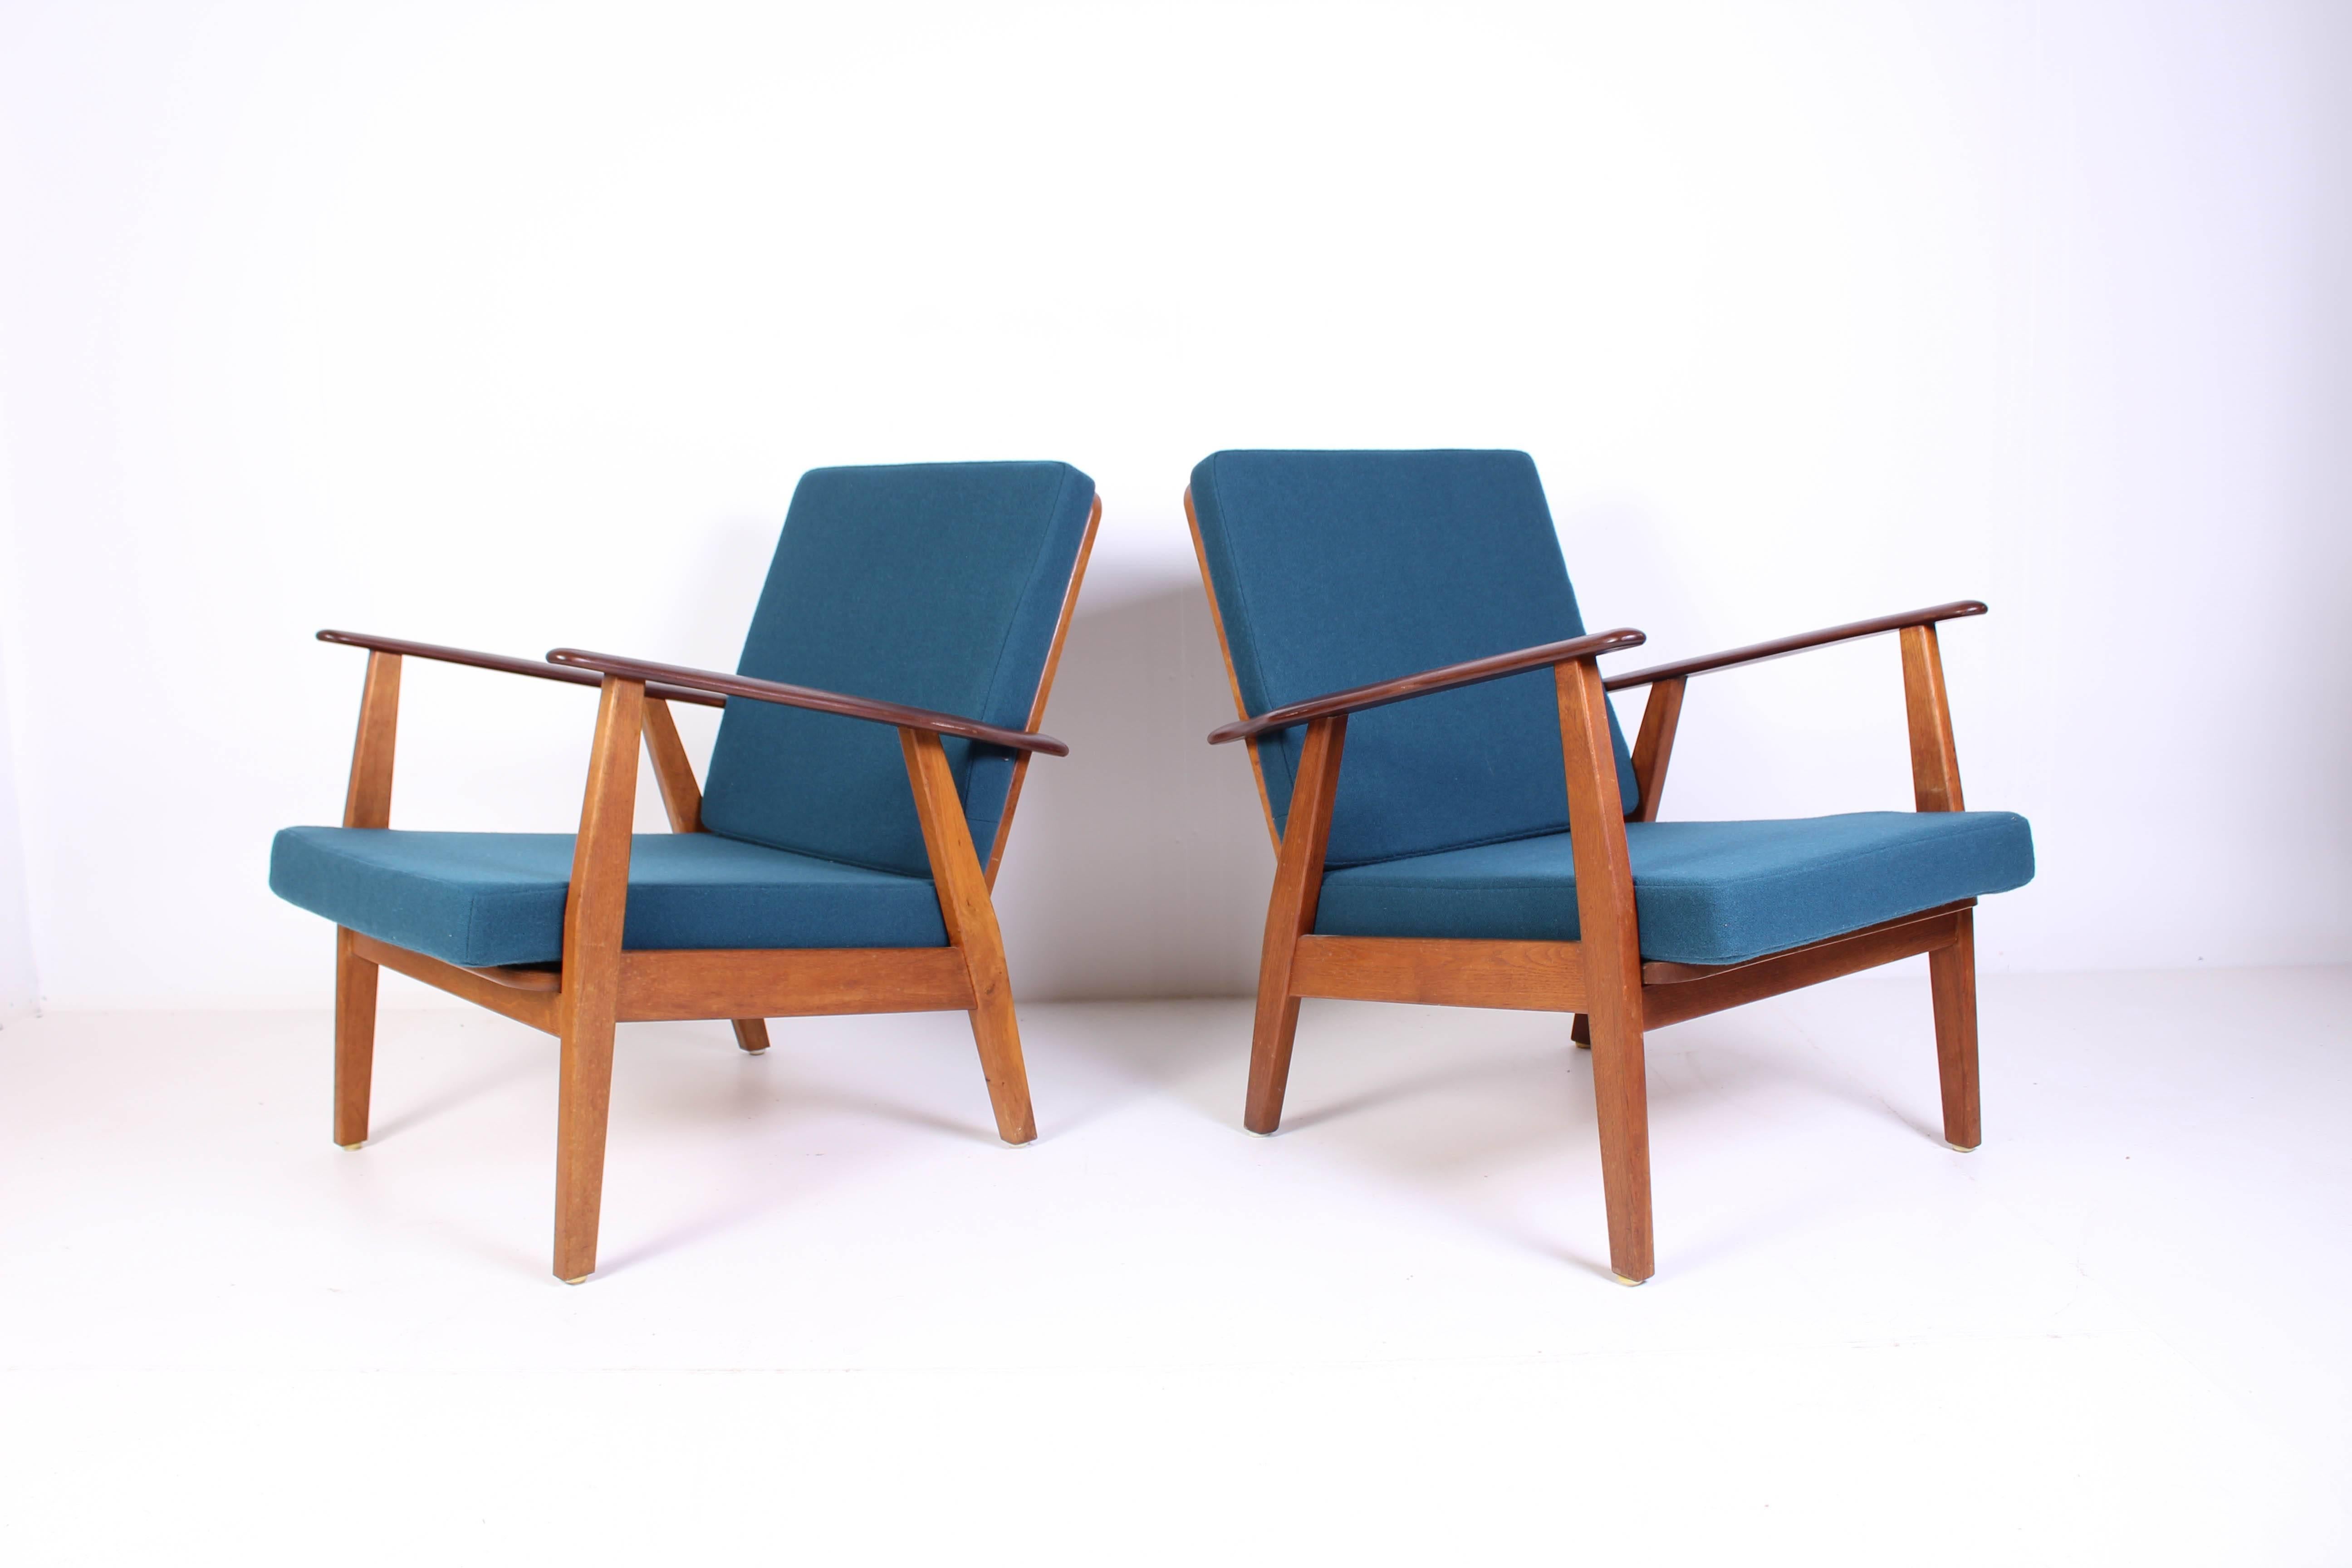 A set of nice Danish lounge chairs with new cushions upholstered with petroleum blue fabric. The chairs are made out of an oak frame with teak armrests. Very good vintage condition with signs of usage consistent with age.